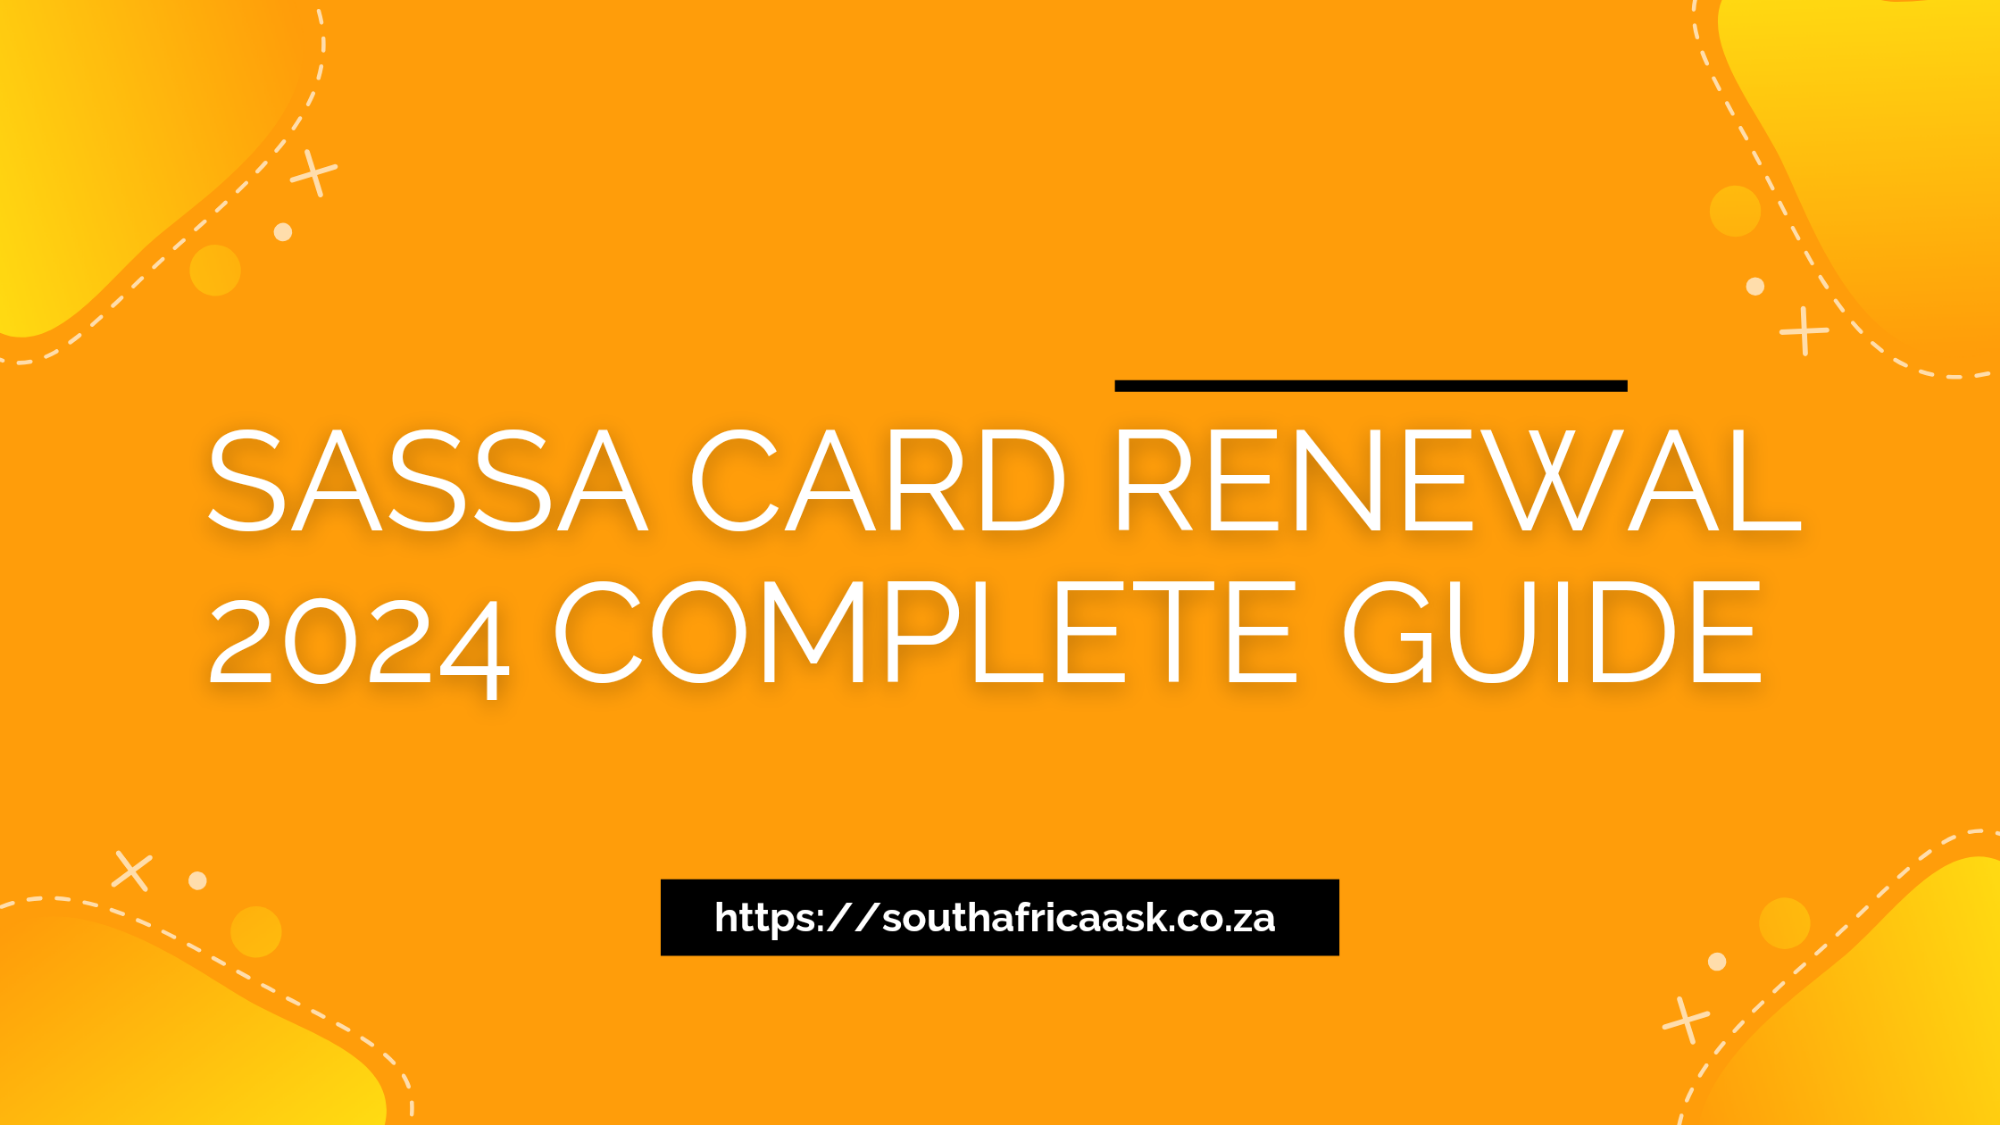 SASSA Card Renewal 2024 Complete Guide